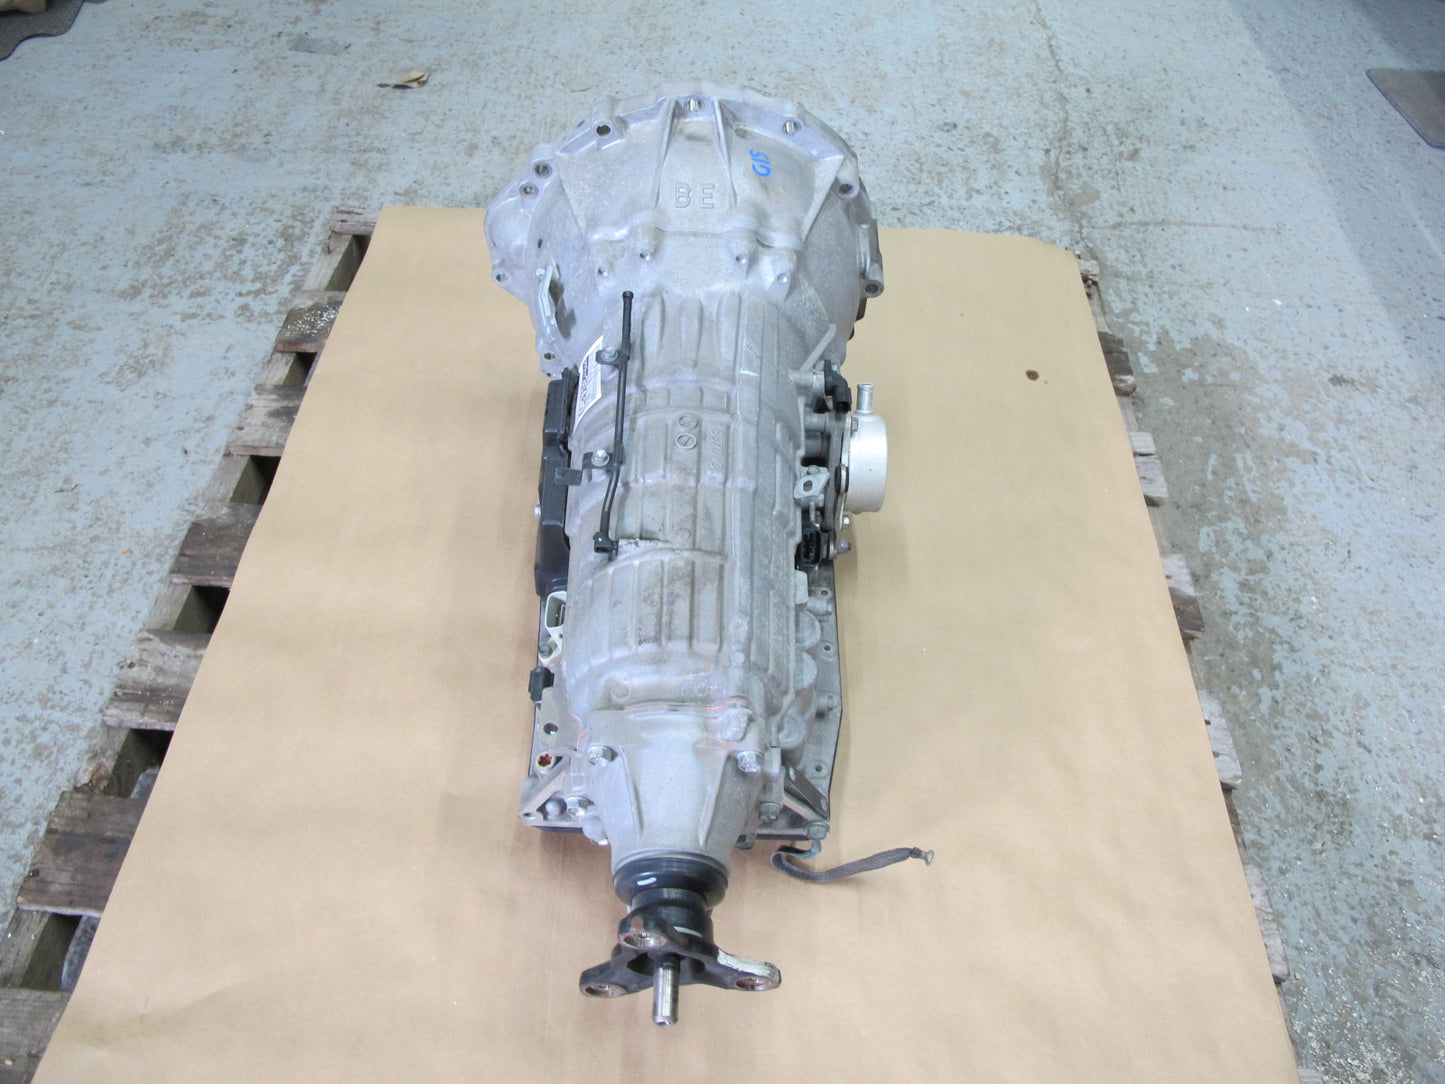 06-15 LEXUS IS350 6-SPEED A/T AUTOMATIC TRANSMISSION 122k MILES OEM